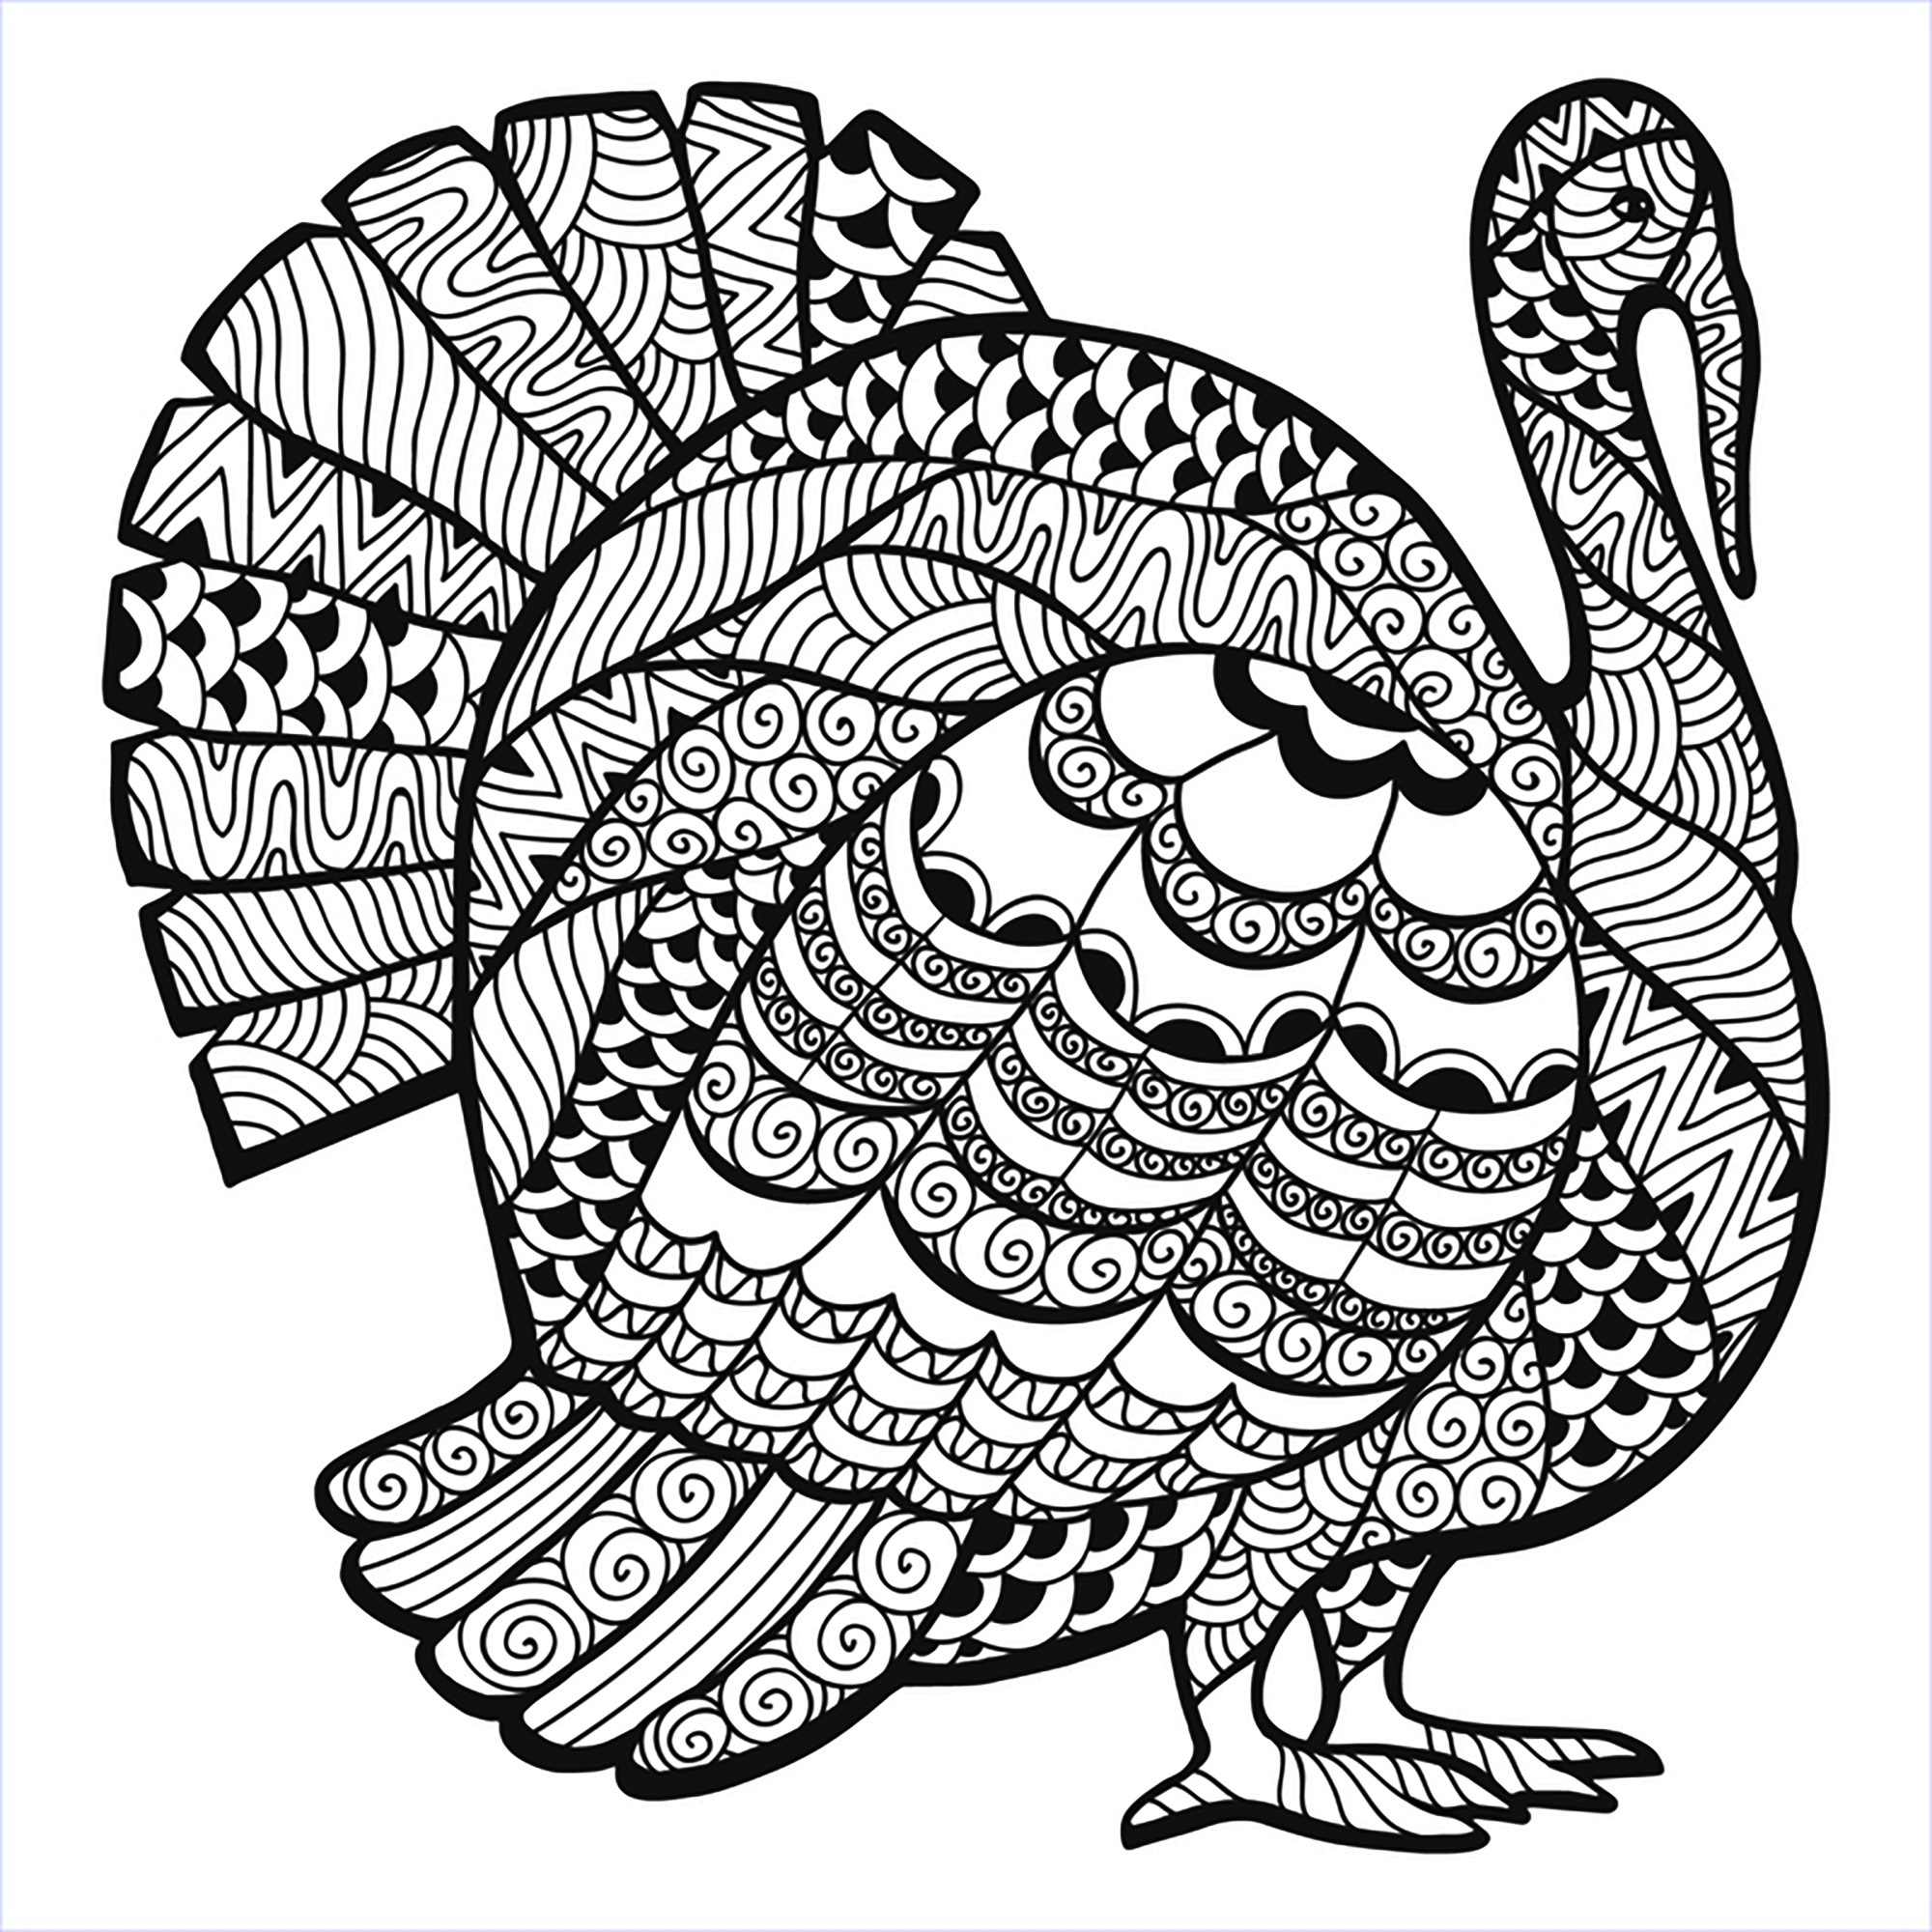 Thanksgiving Coloring Pages For Kids To Print | Let'S Coloring The World